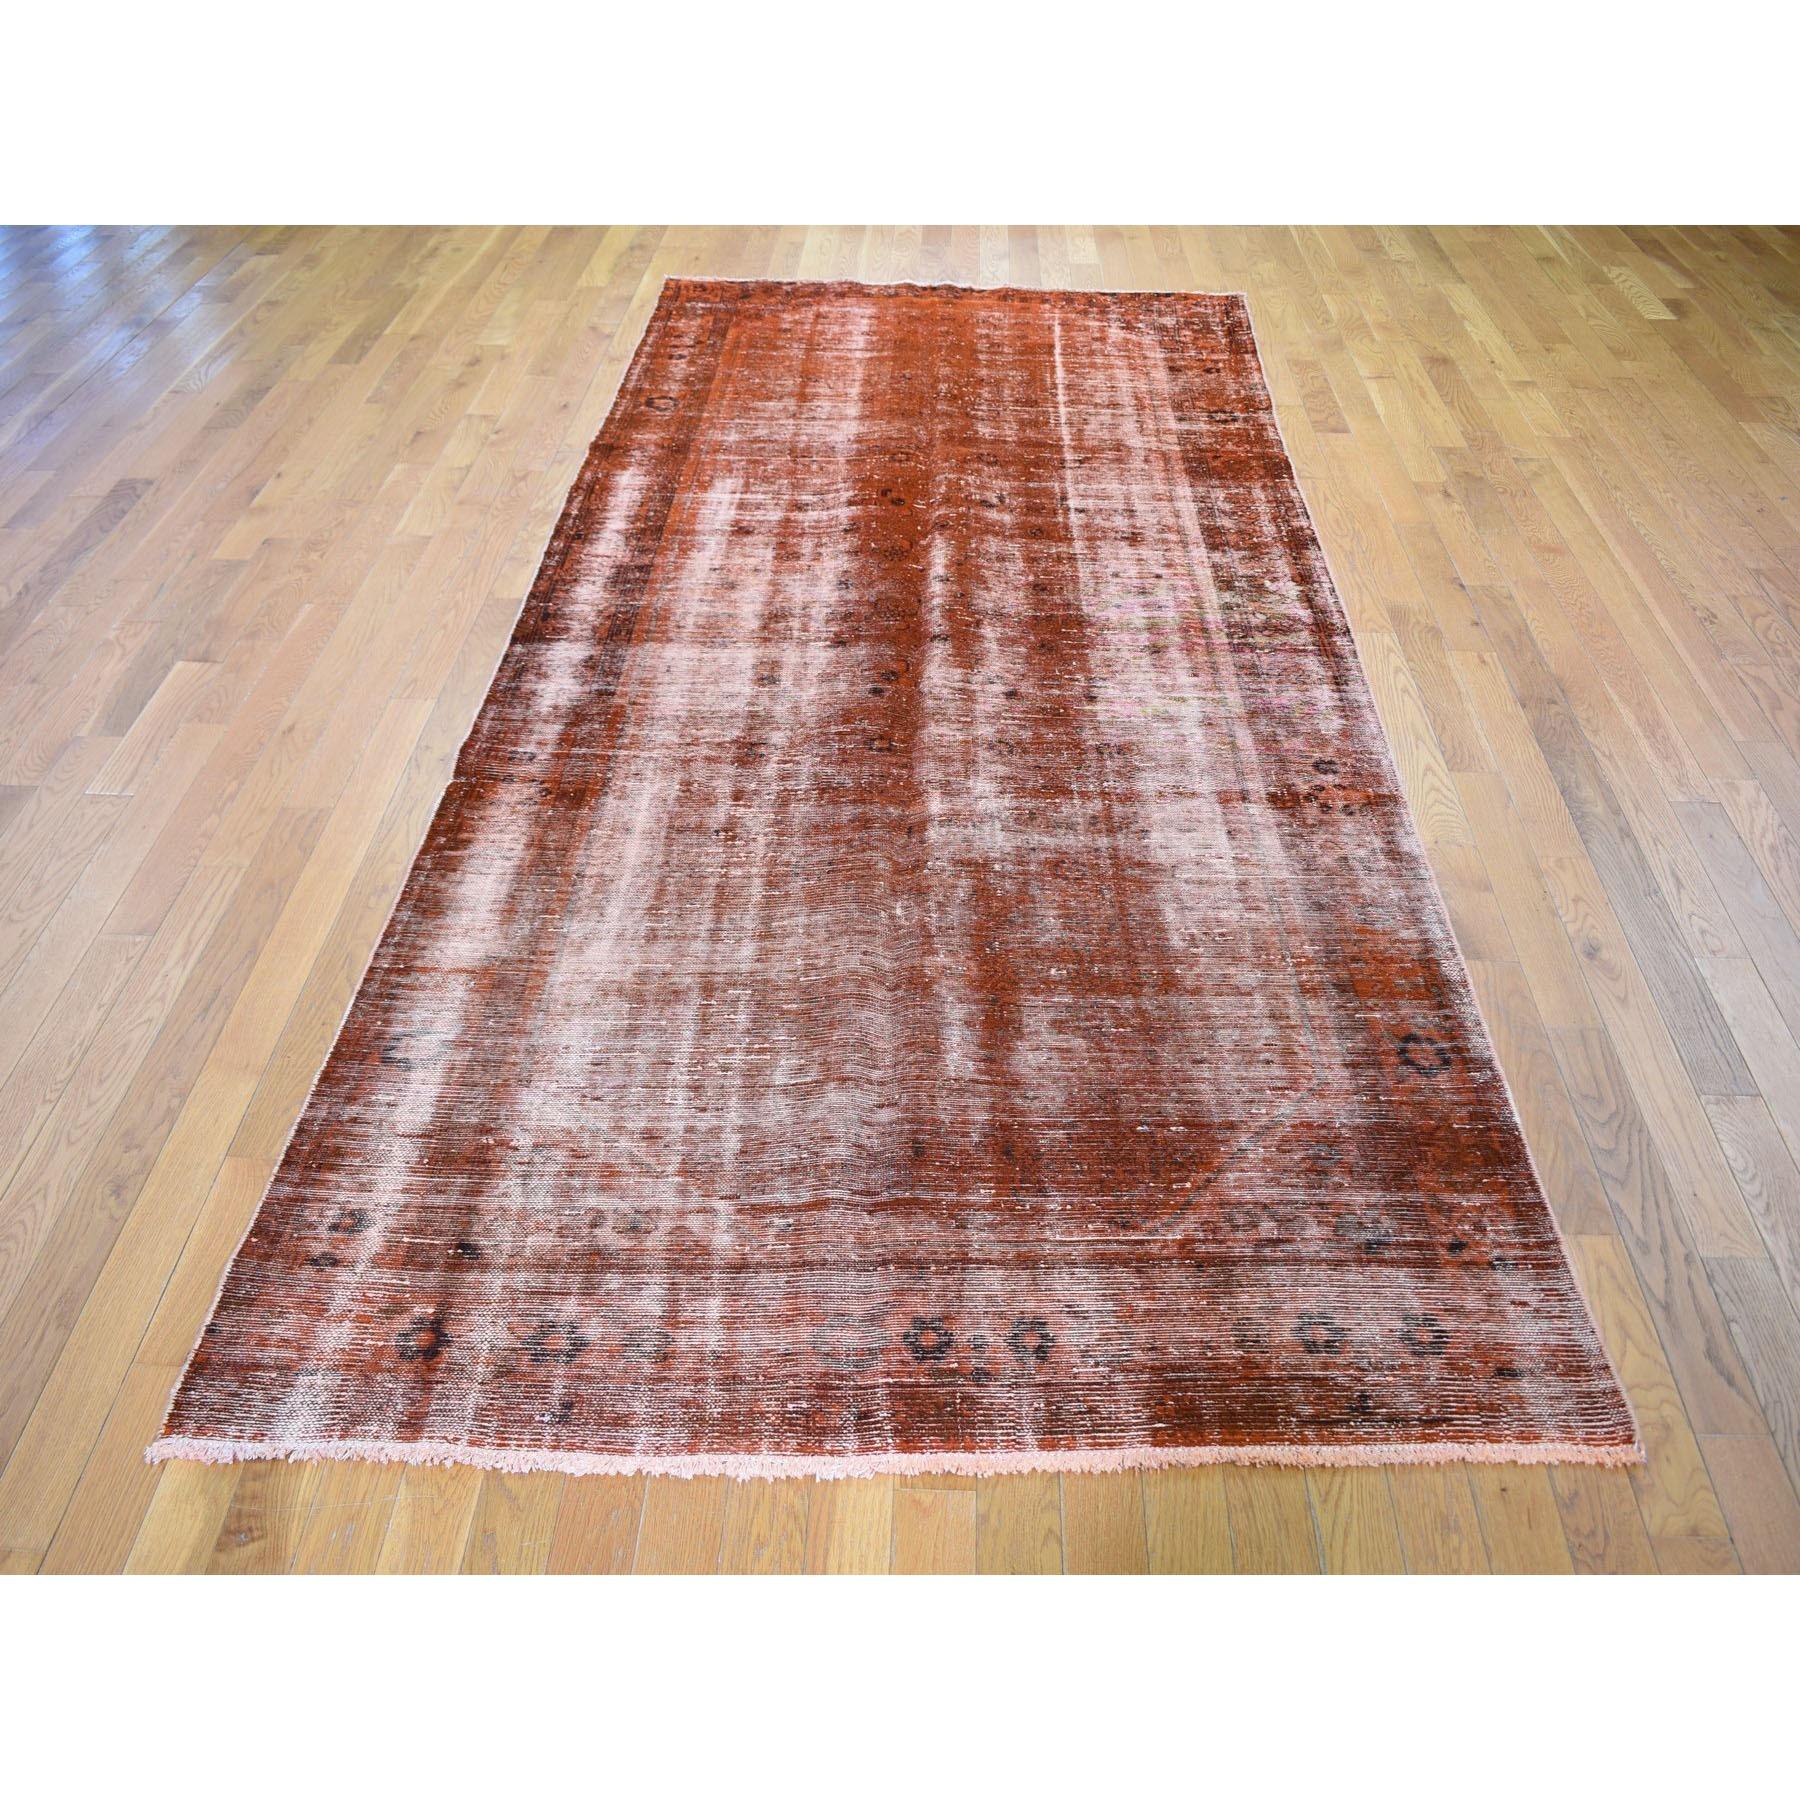 This fabulous hand-knotted carpet has been created and designed for extra strength and durability. This rug has been handcrafted for weeks in the traditional method that is used to make
Exact Rug Size in Feet and Inches : 5'0